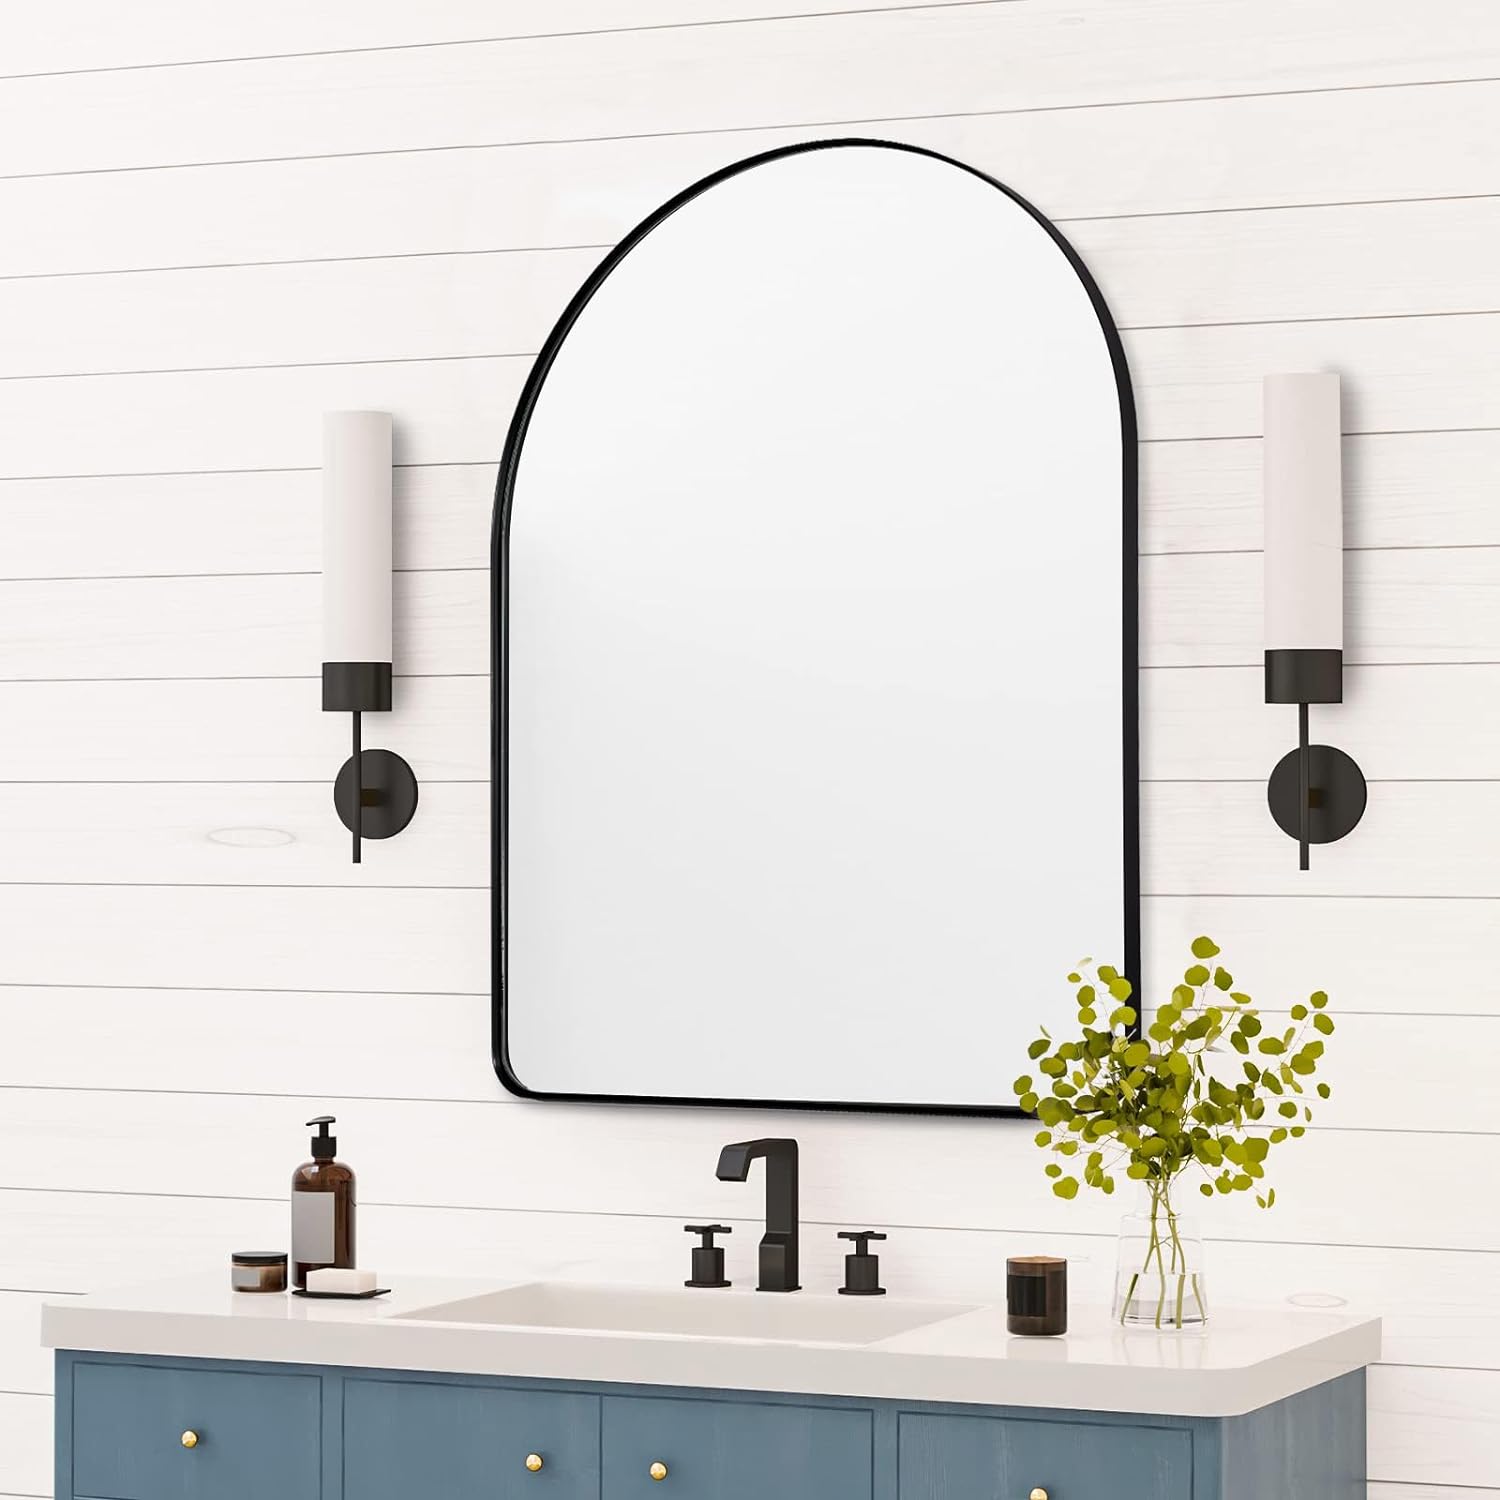 Open Box Like New: Antique Arched Bathroom Wall Mirror, Vanity Wall Mounted mirrors